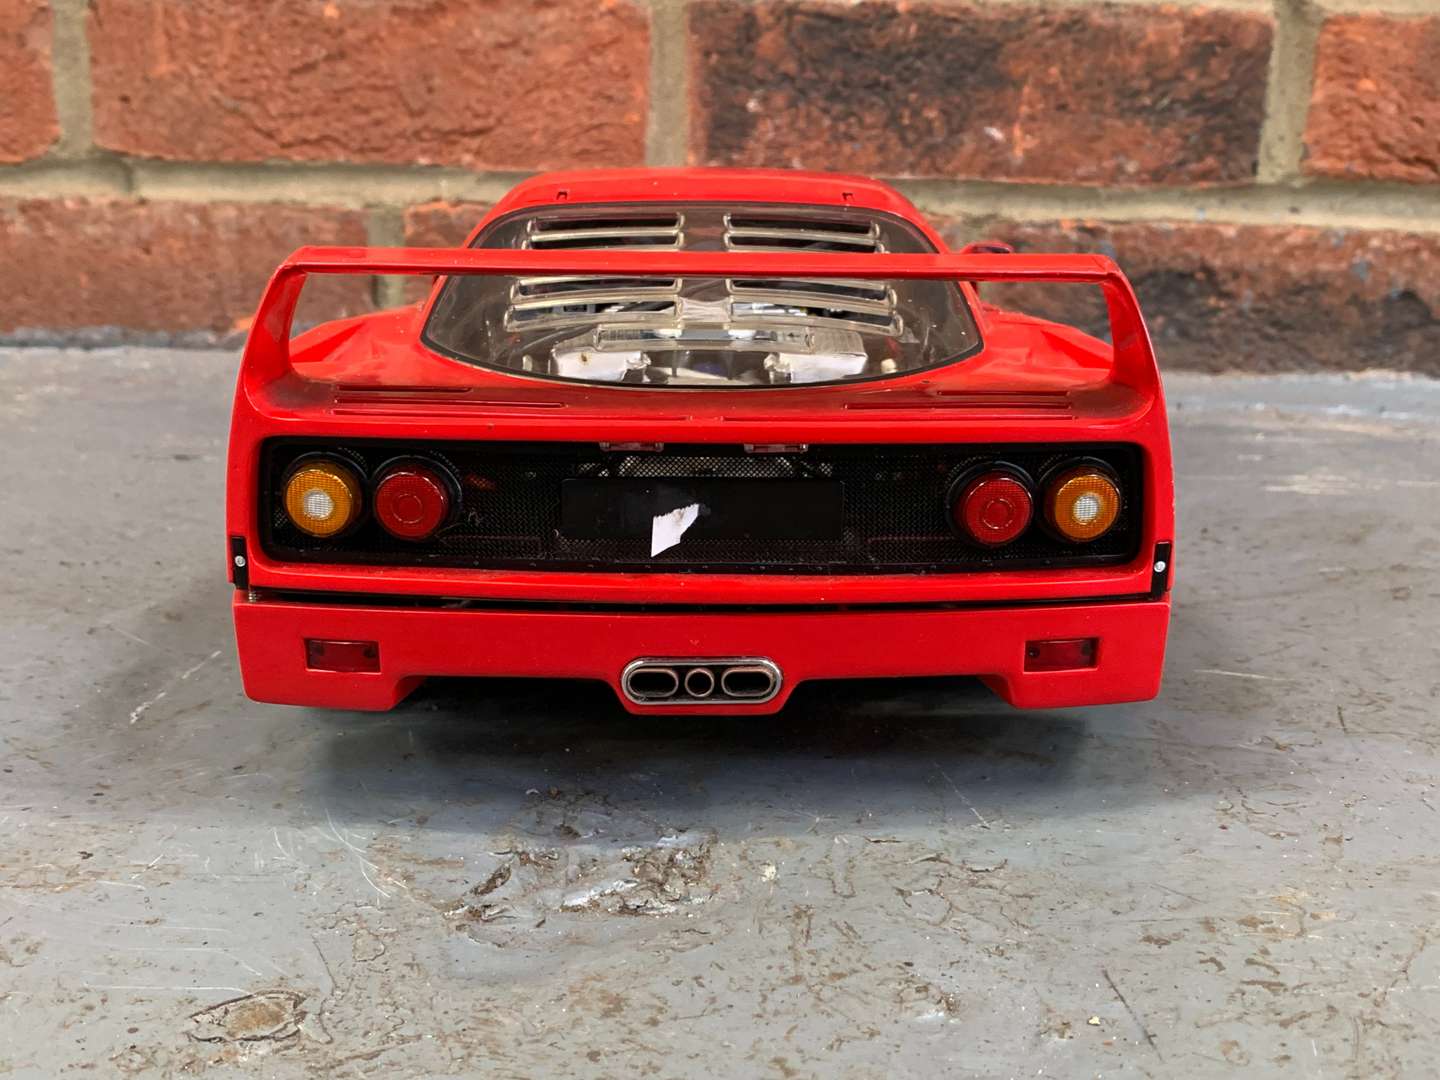 Kyosho Die Cast F40 1:12 Scale Model - Image 4 of 8